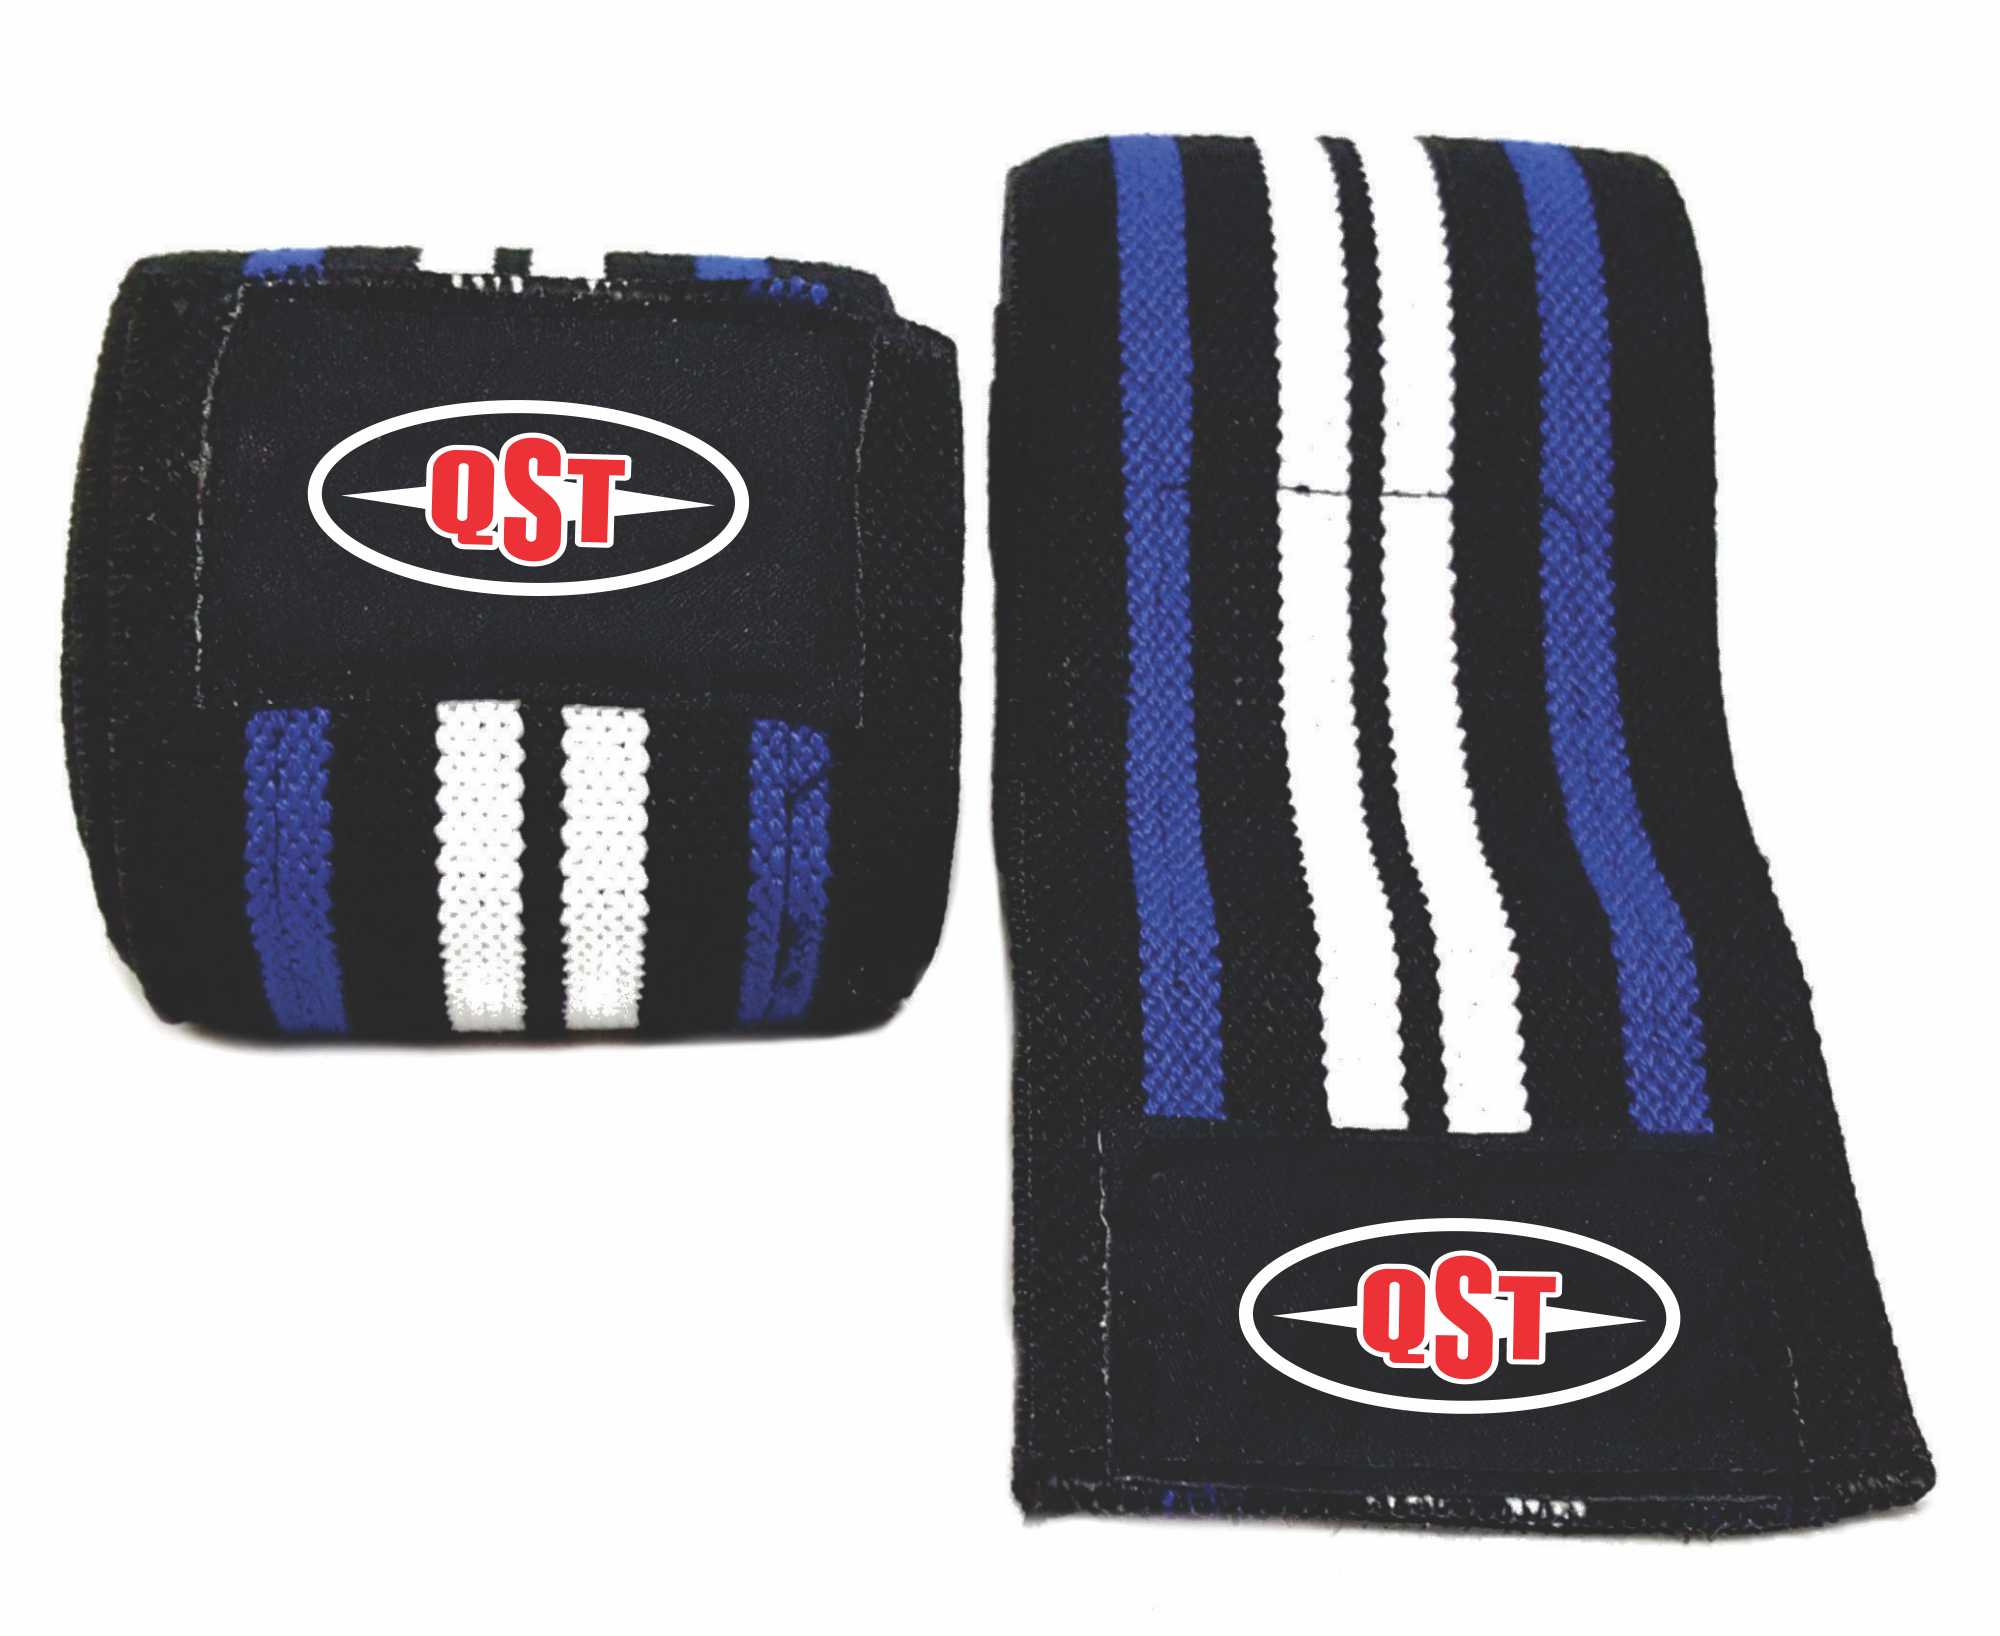 Weightlifting Knee Wraps - ACS-1525